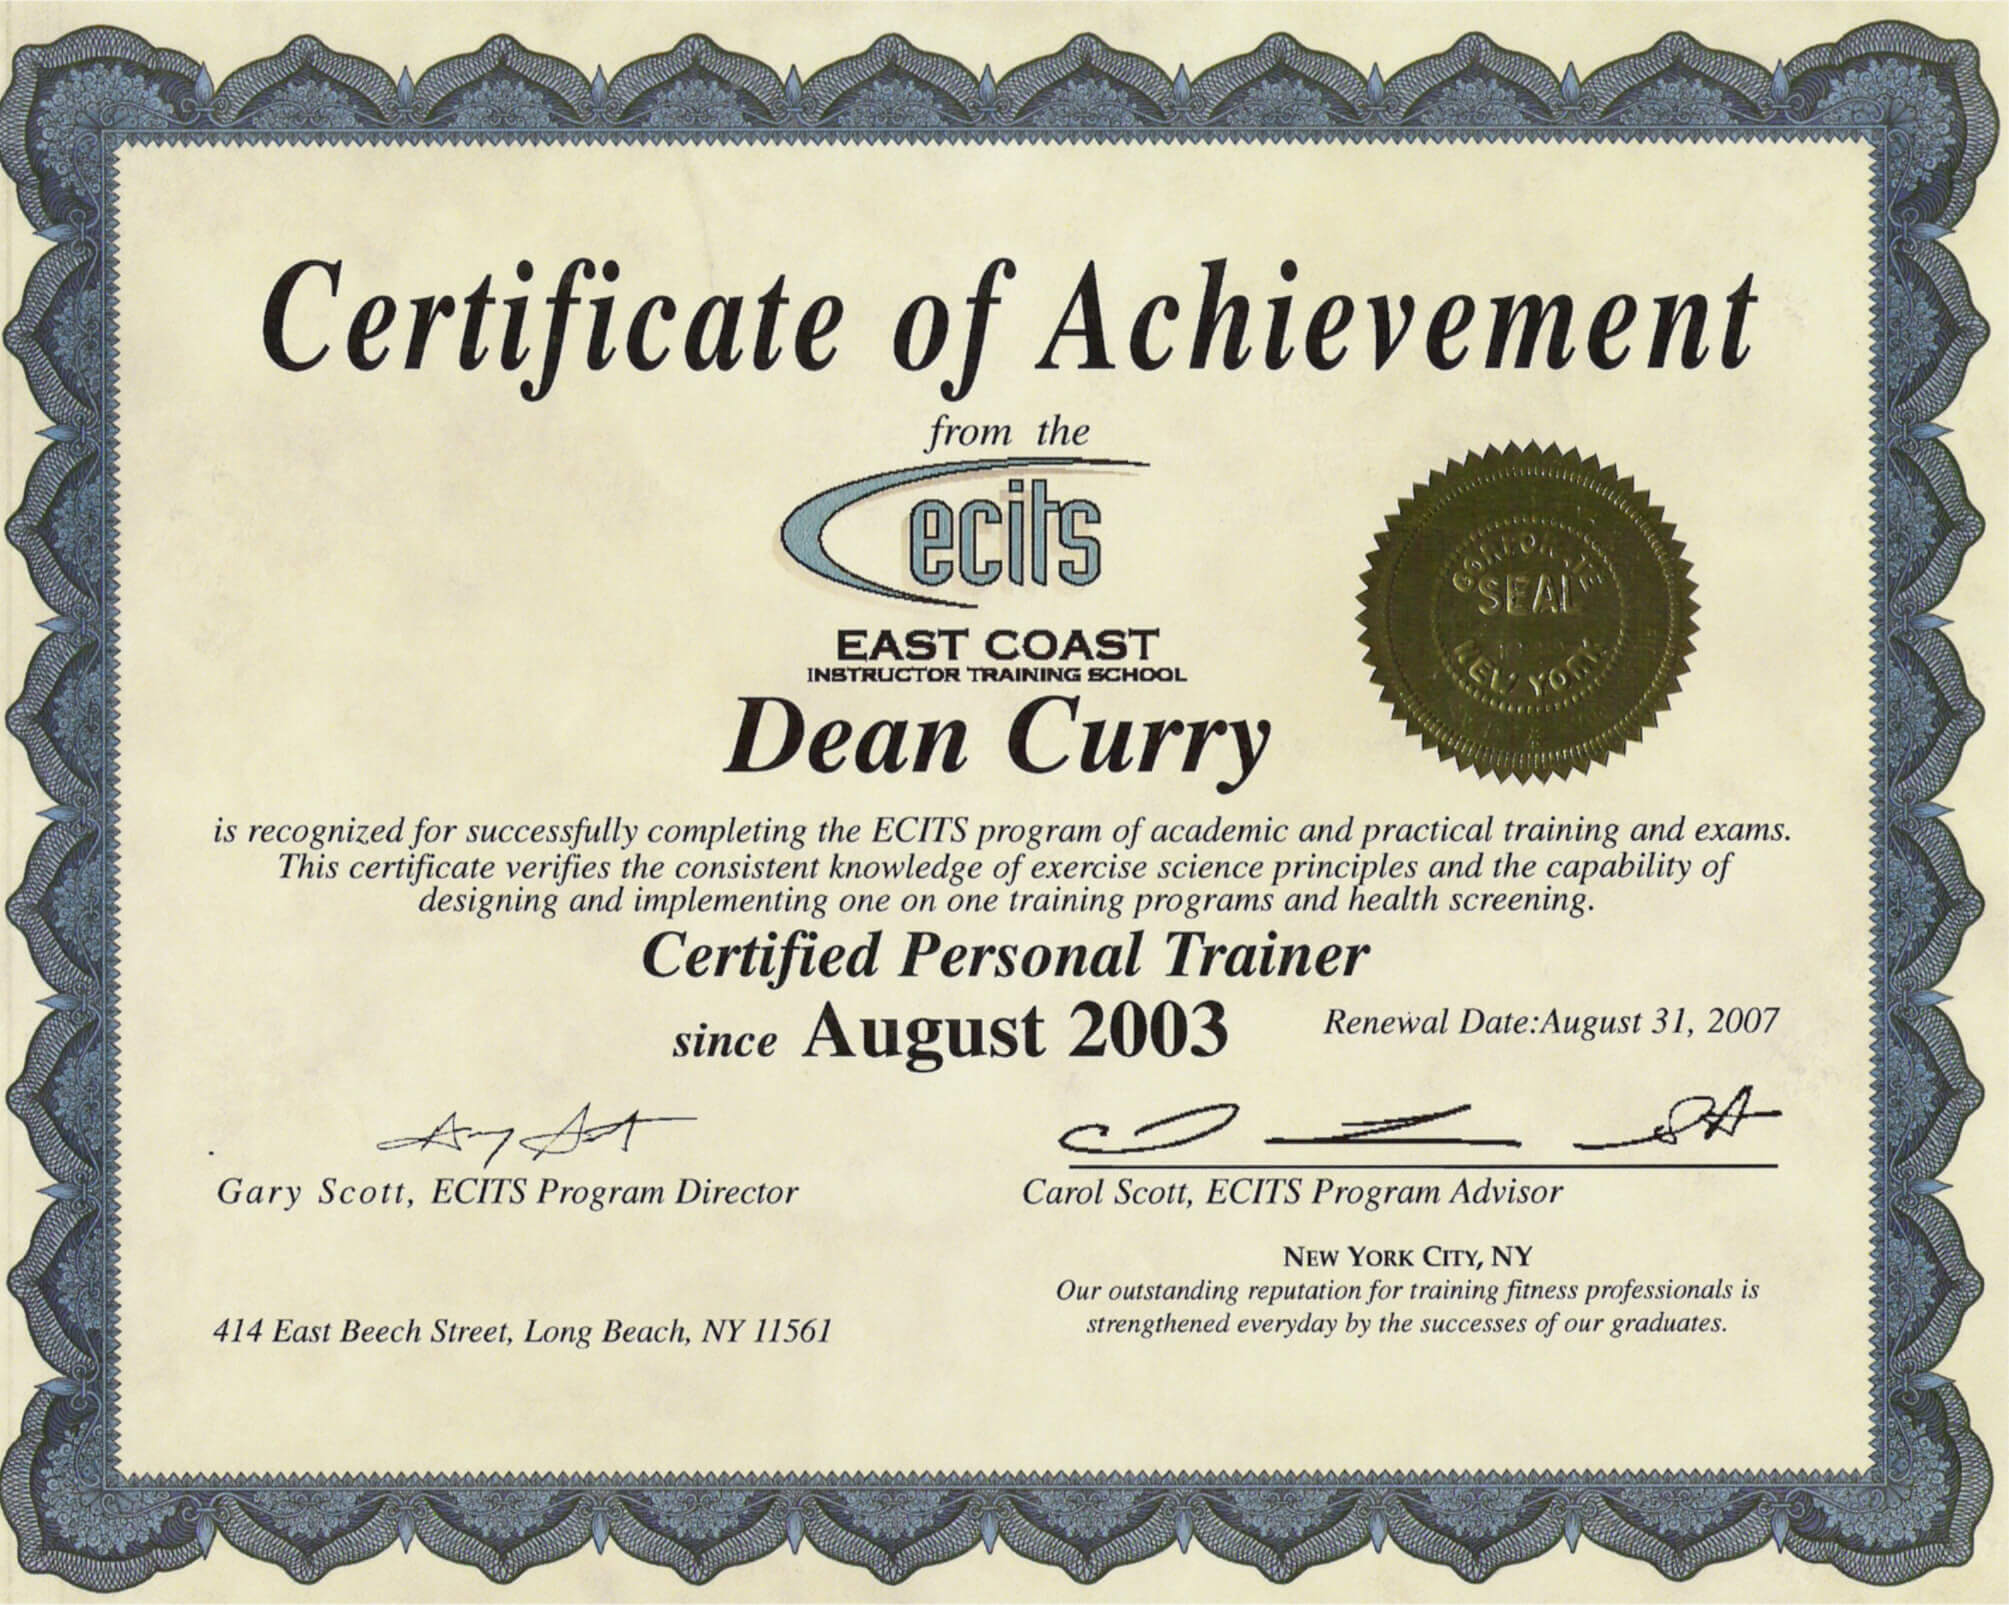 Certificate Of Achievement Army Template ] – Army Within Certificate Of Achievement Army Template